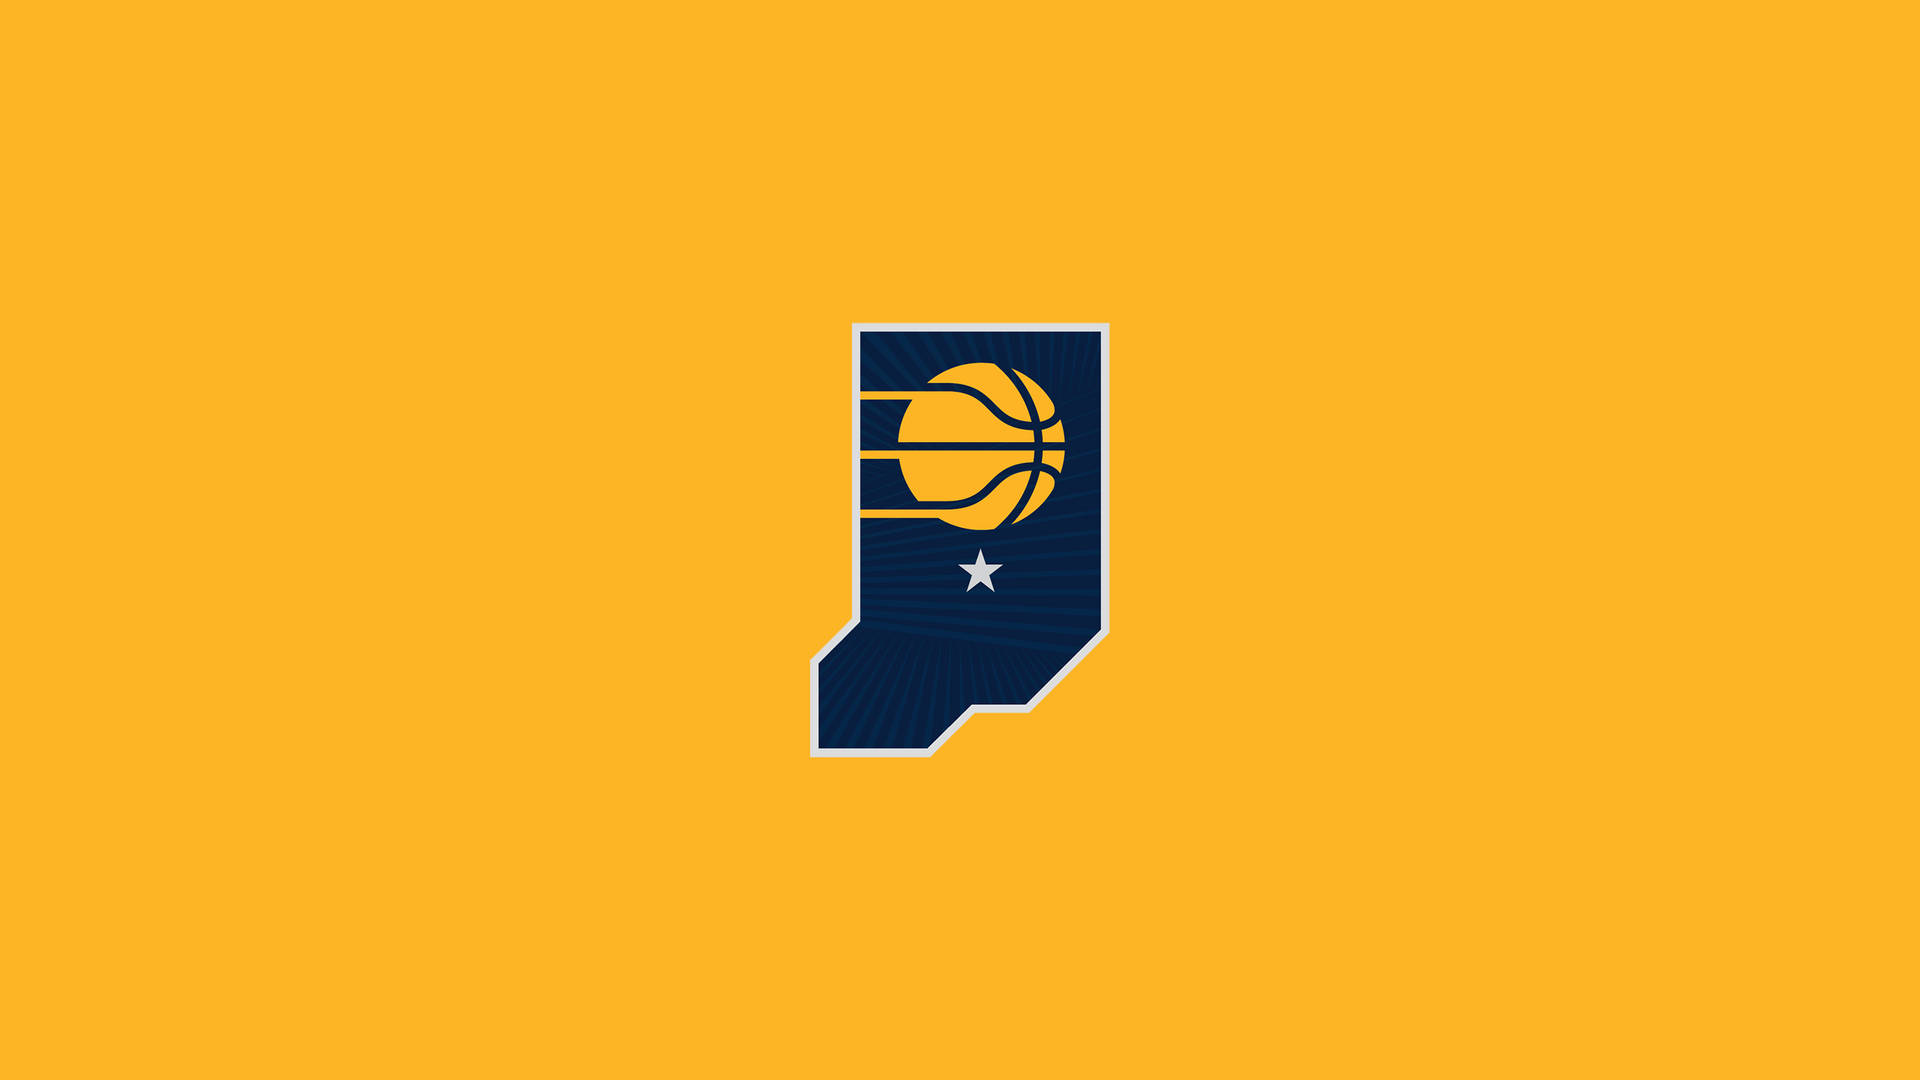 Indian Pacers State Minimalist Logo Wallpaper